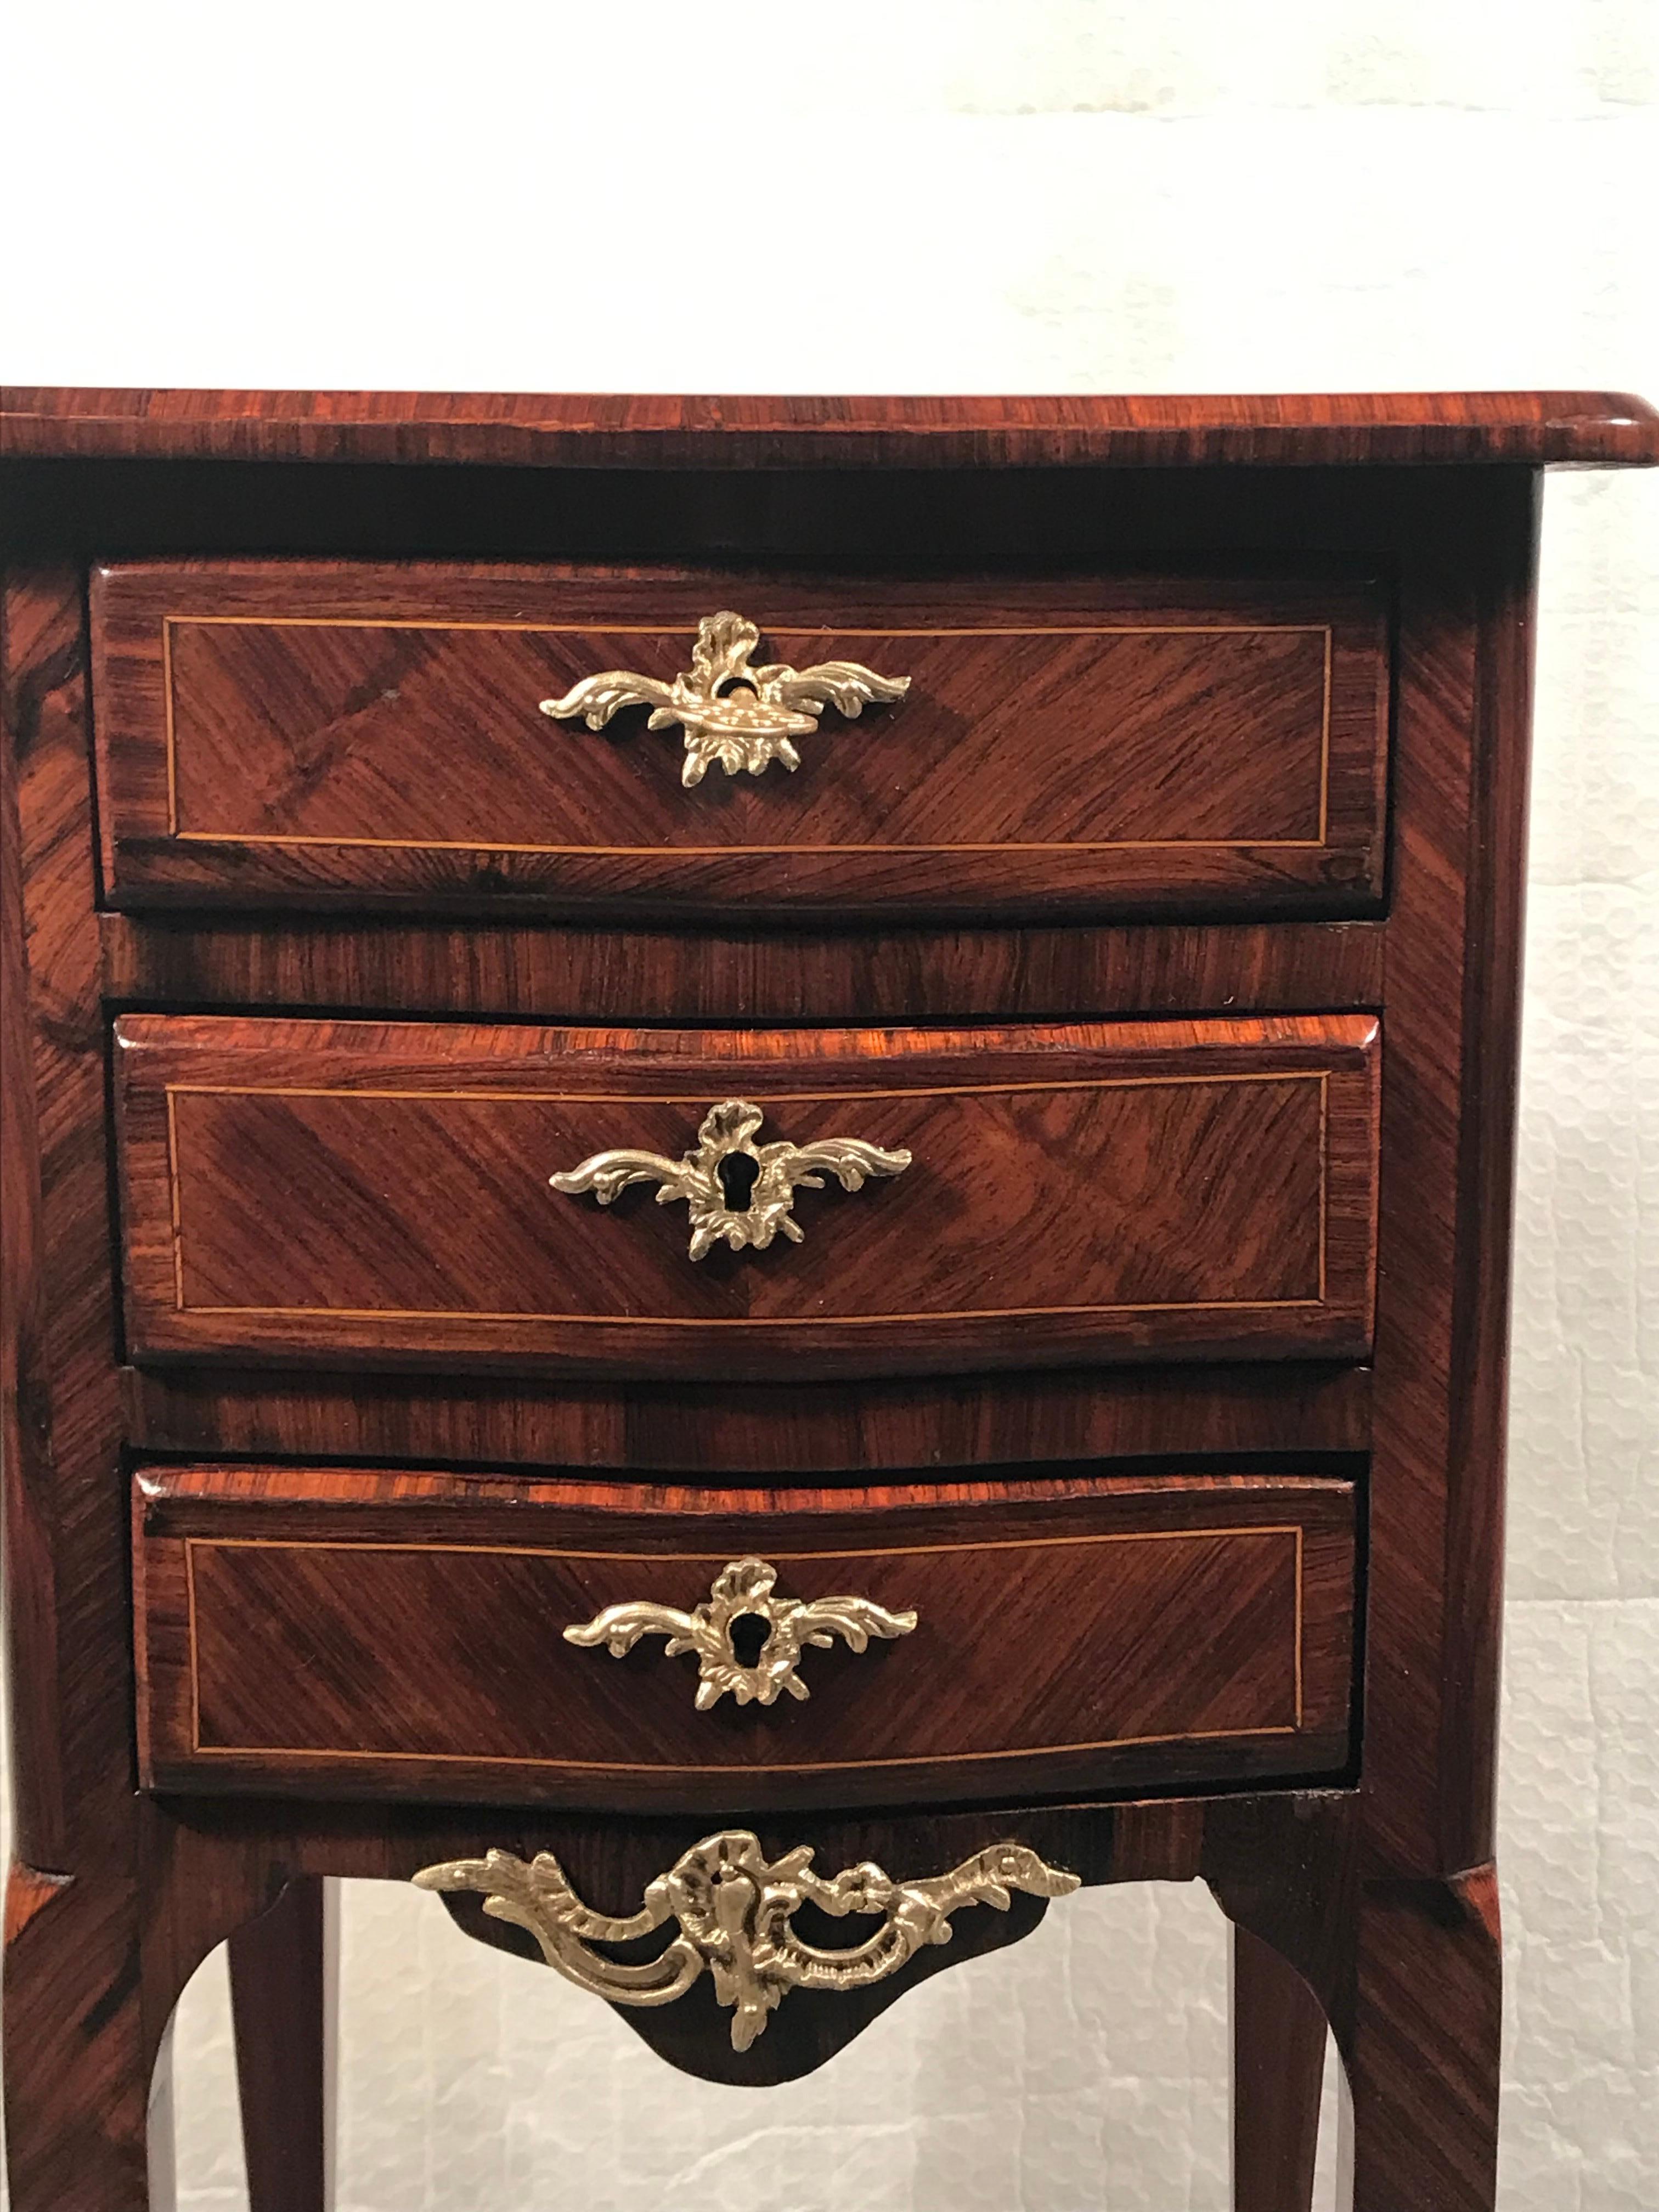 Small Rococo style chest of drawers or nightstand, France 19th century. This beautiful small dresser has a gorgeous kingwood veneer and is decorated with Rococo Style bronze fittings. It comes fully refinished with a shellac polish, these extra